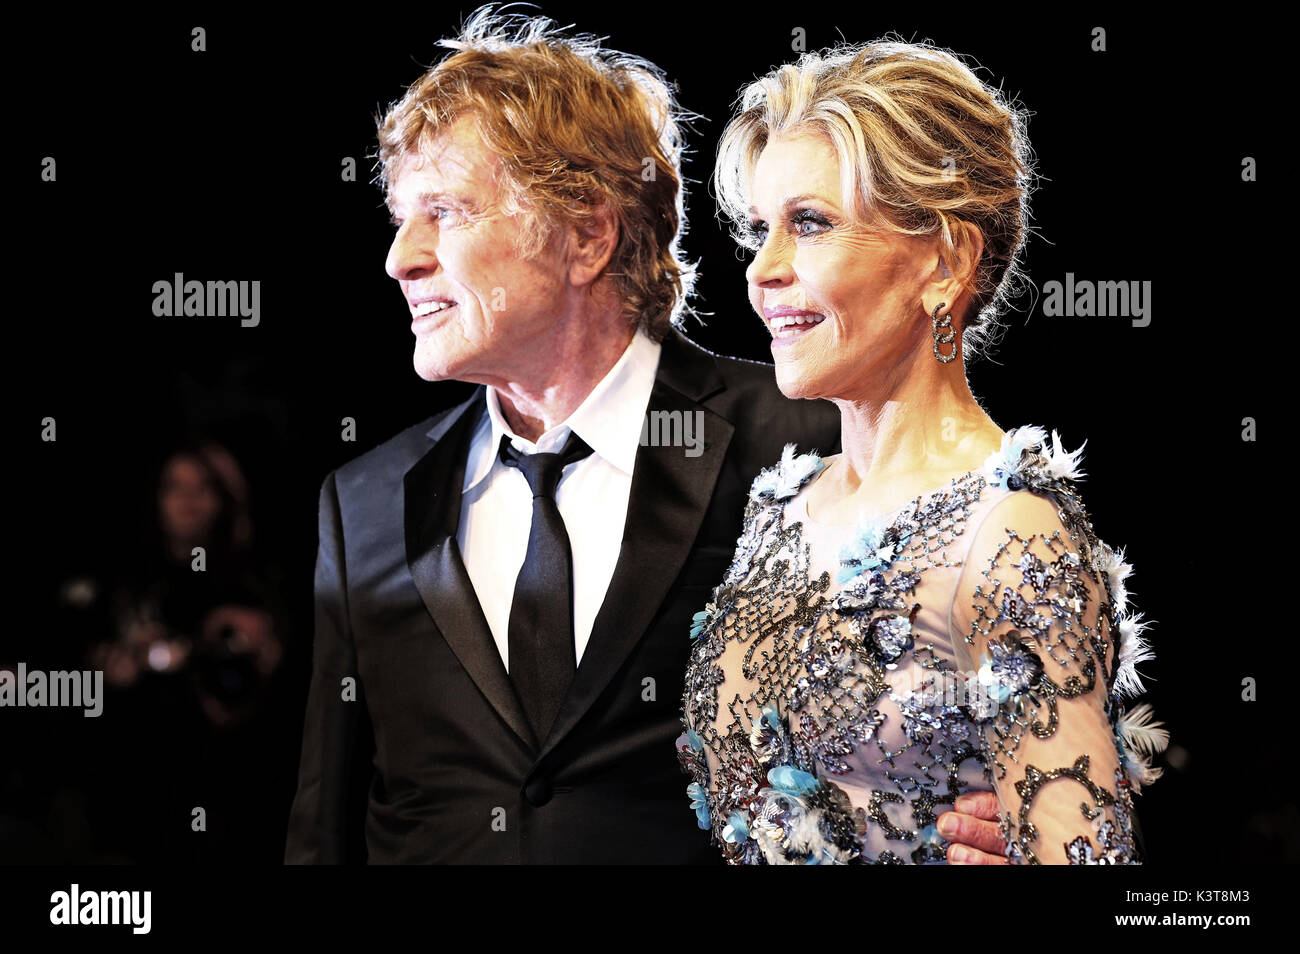 Venice, Italy. 01st Sep, 2017. Robert Redford and Jane Fonda attending the 'Our Souls at Night' premiere at the 74th Venice International Film Festival at the Palazzo del Cinema on September 01, 2017 in Venice, Italy | usage worldwide Credit: dpa/Alamy Live News Stock Photo